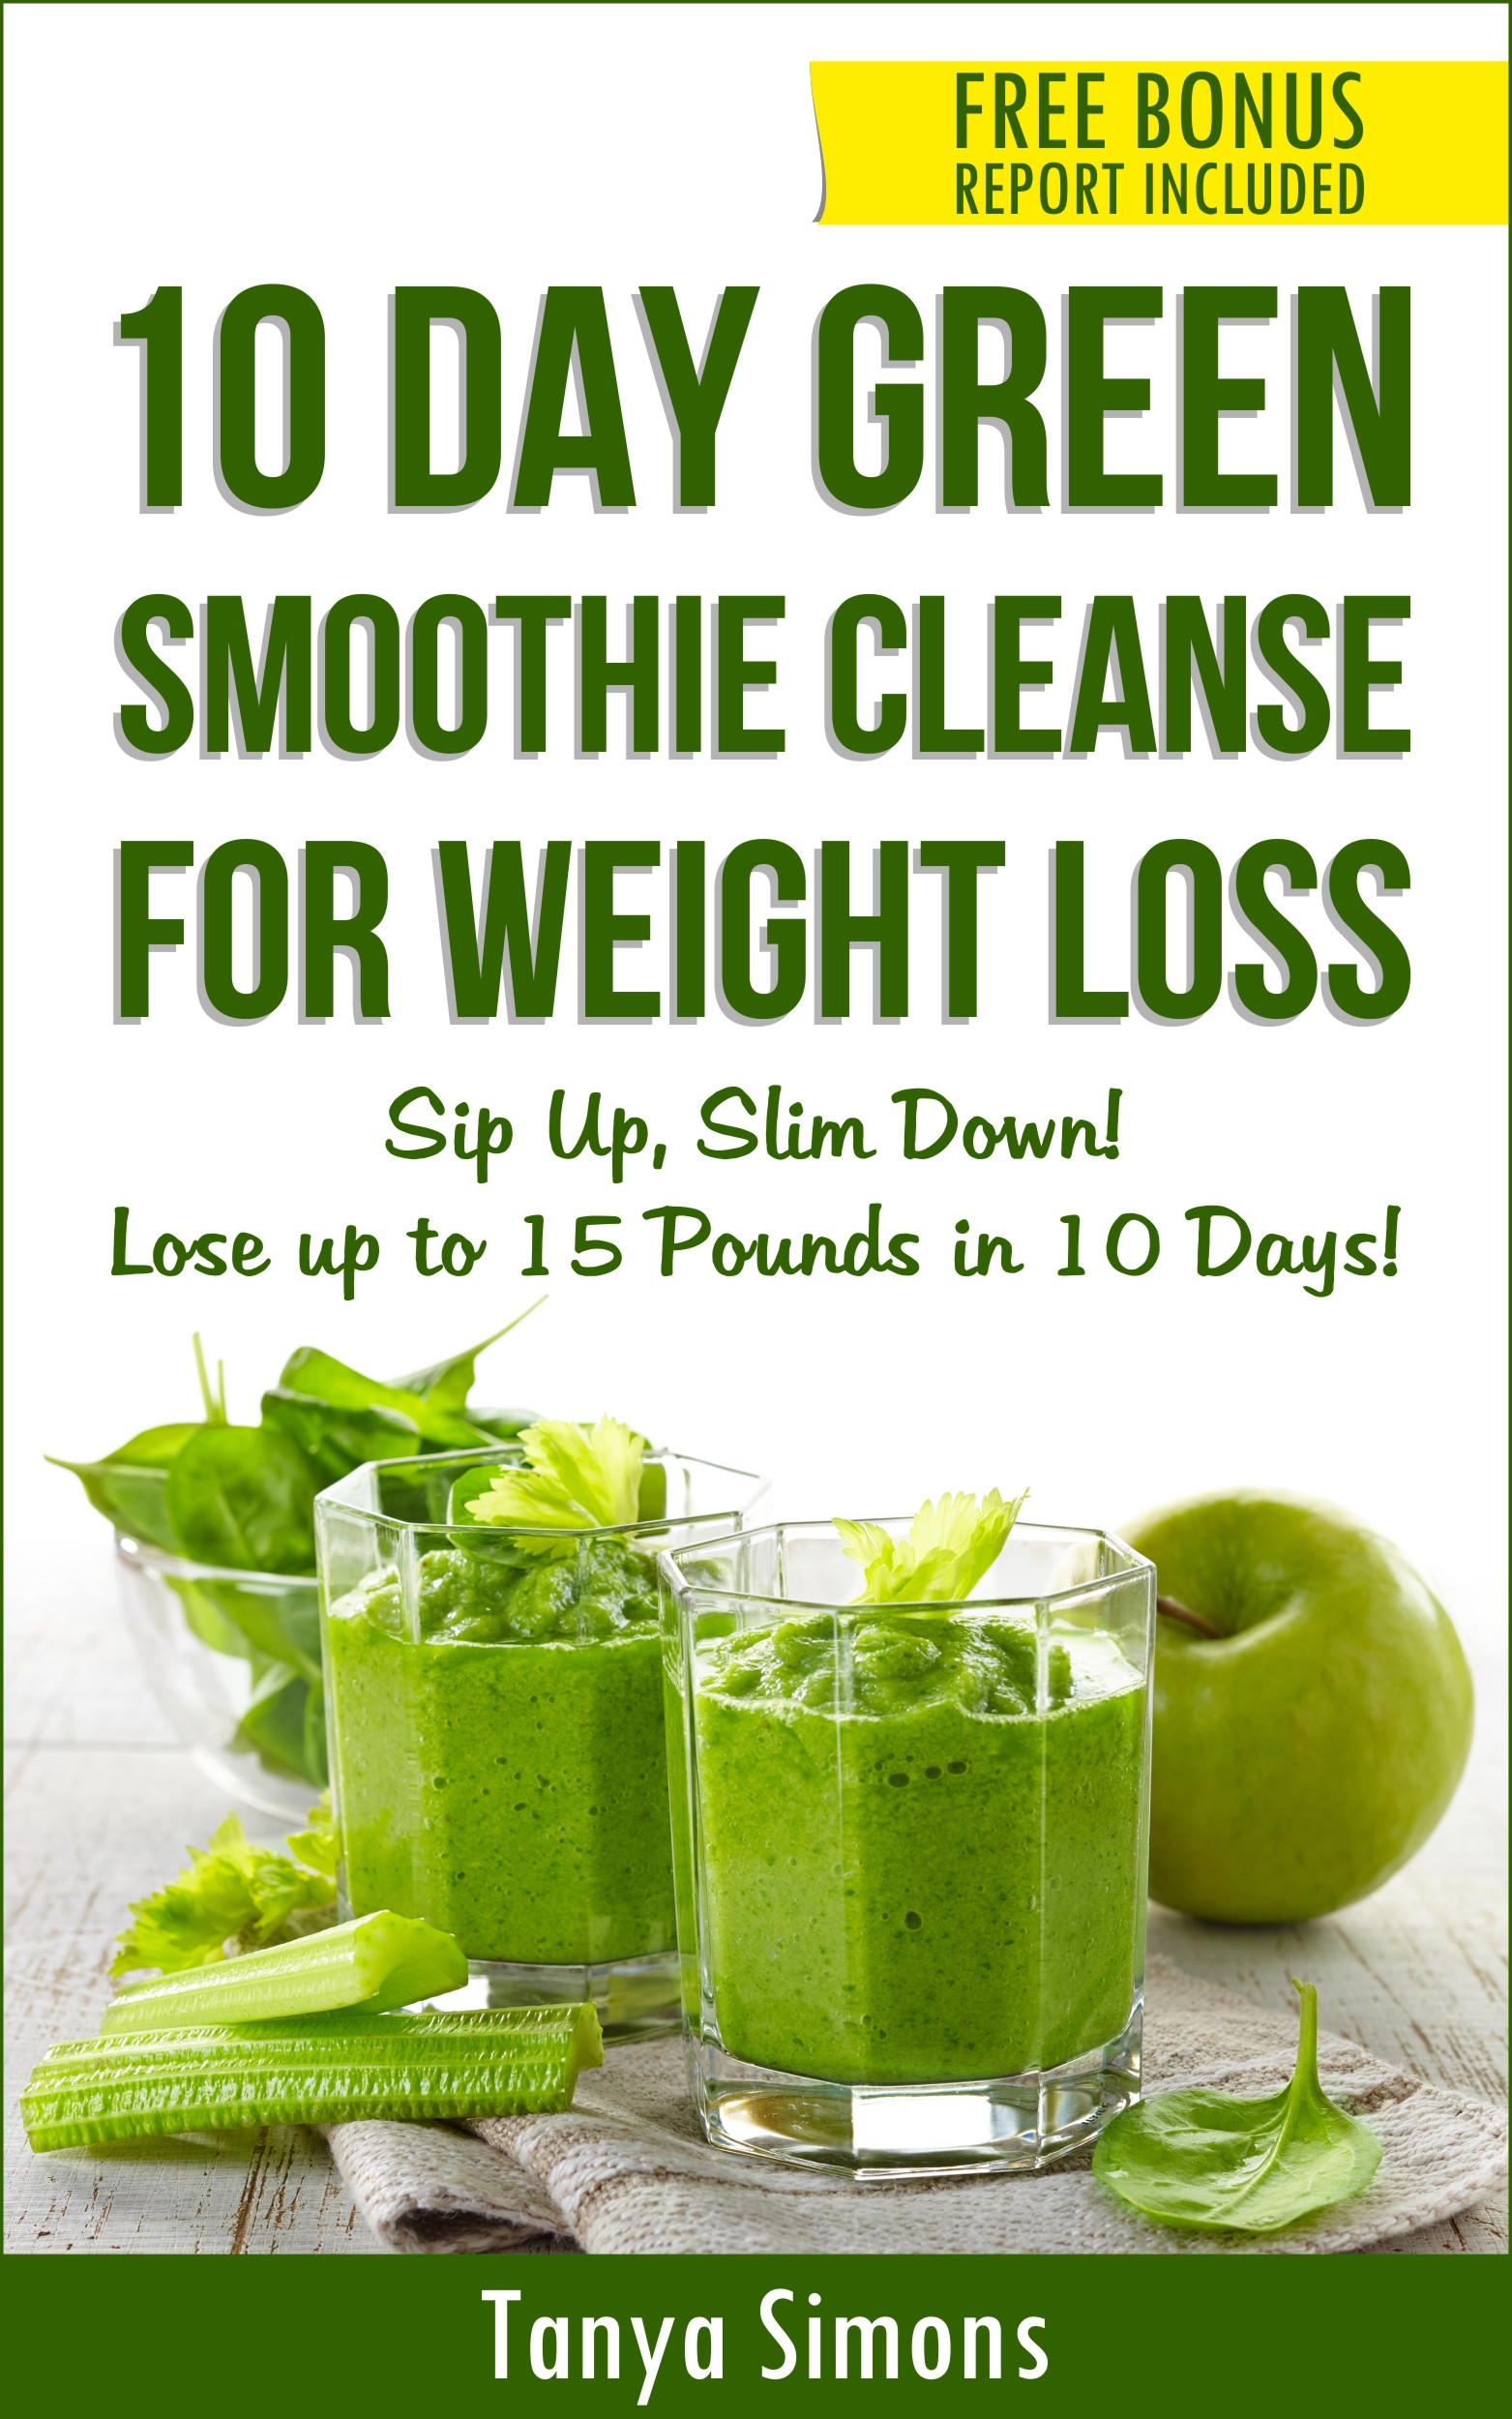 Best Green Smoothies For Weight Loss
 10 Day Green Smoothie Cleanse Lose 15lbs with 10 Day